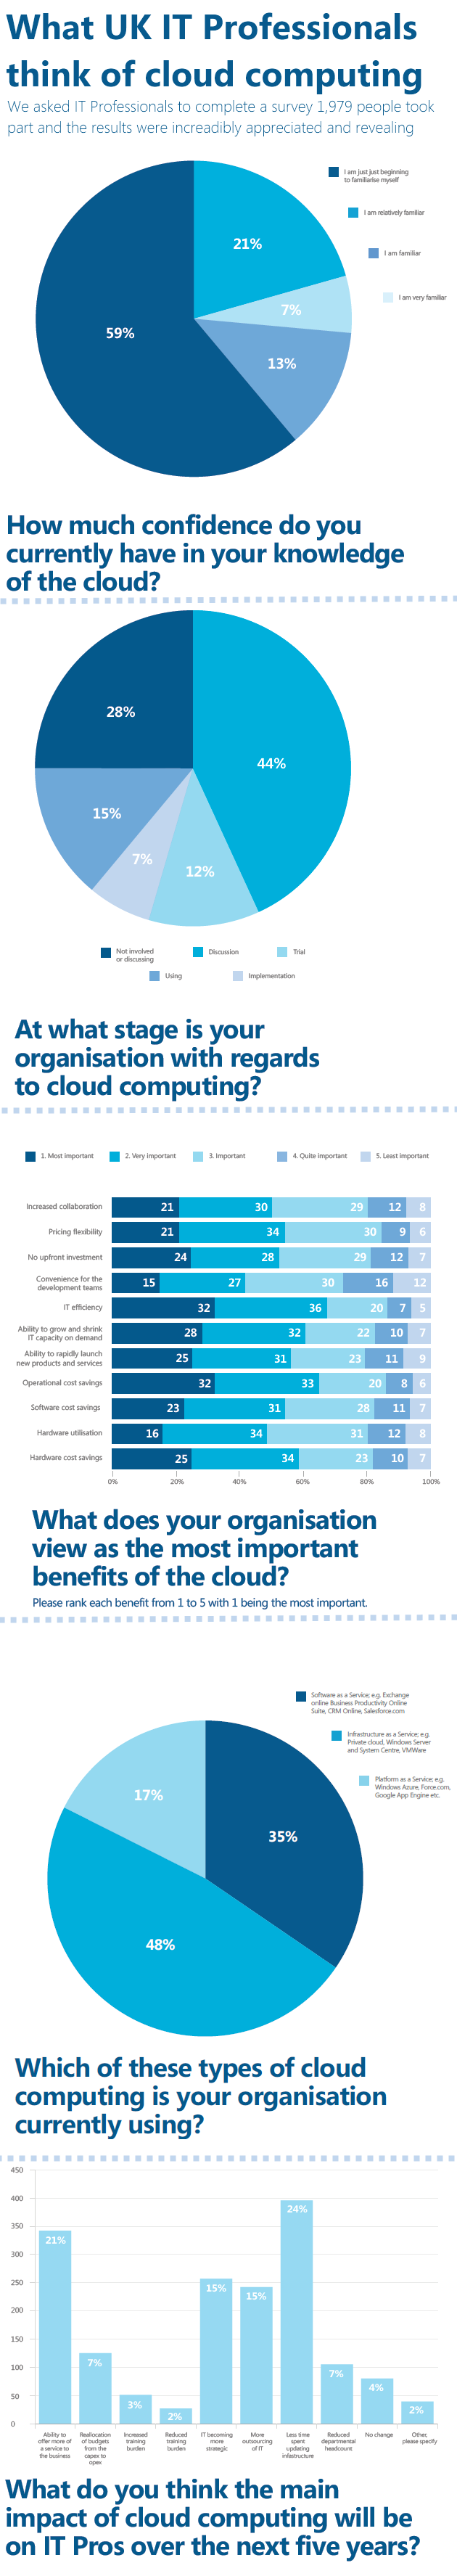 What IT Professionals think about the Cloud